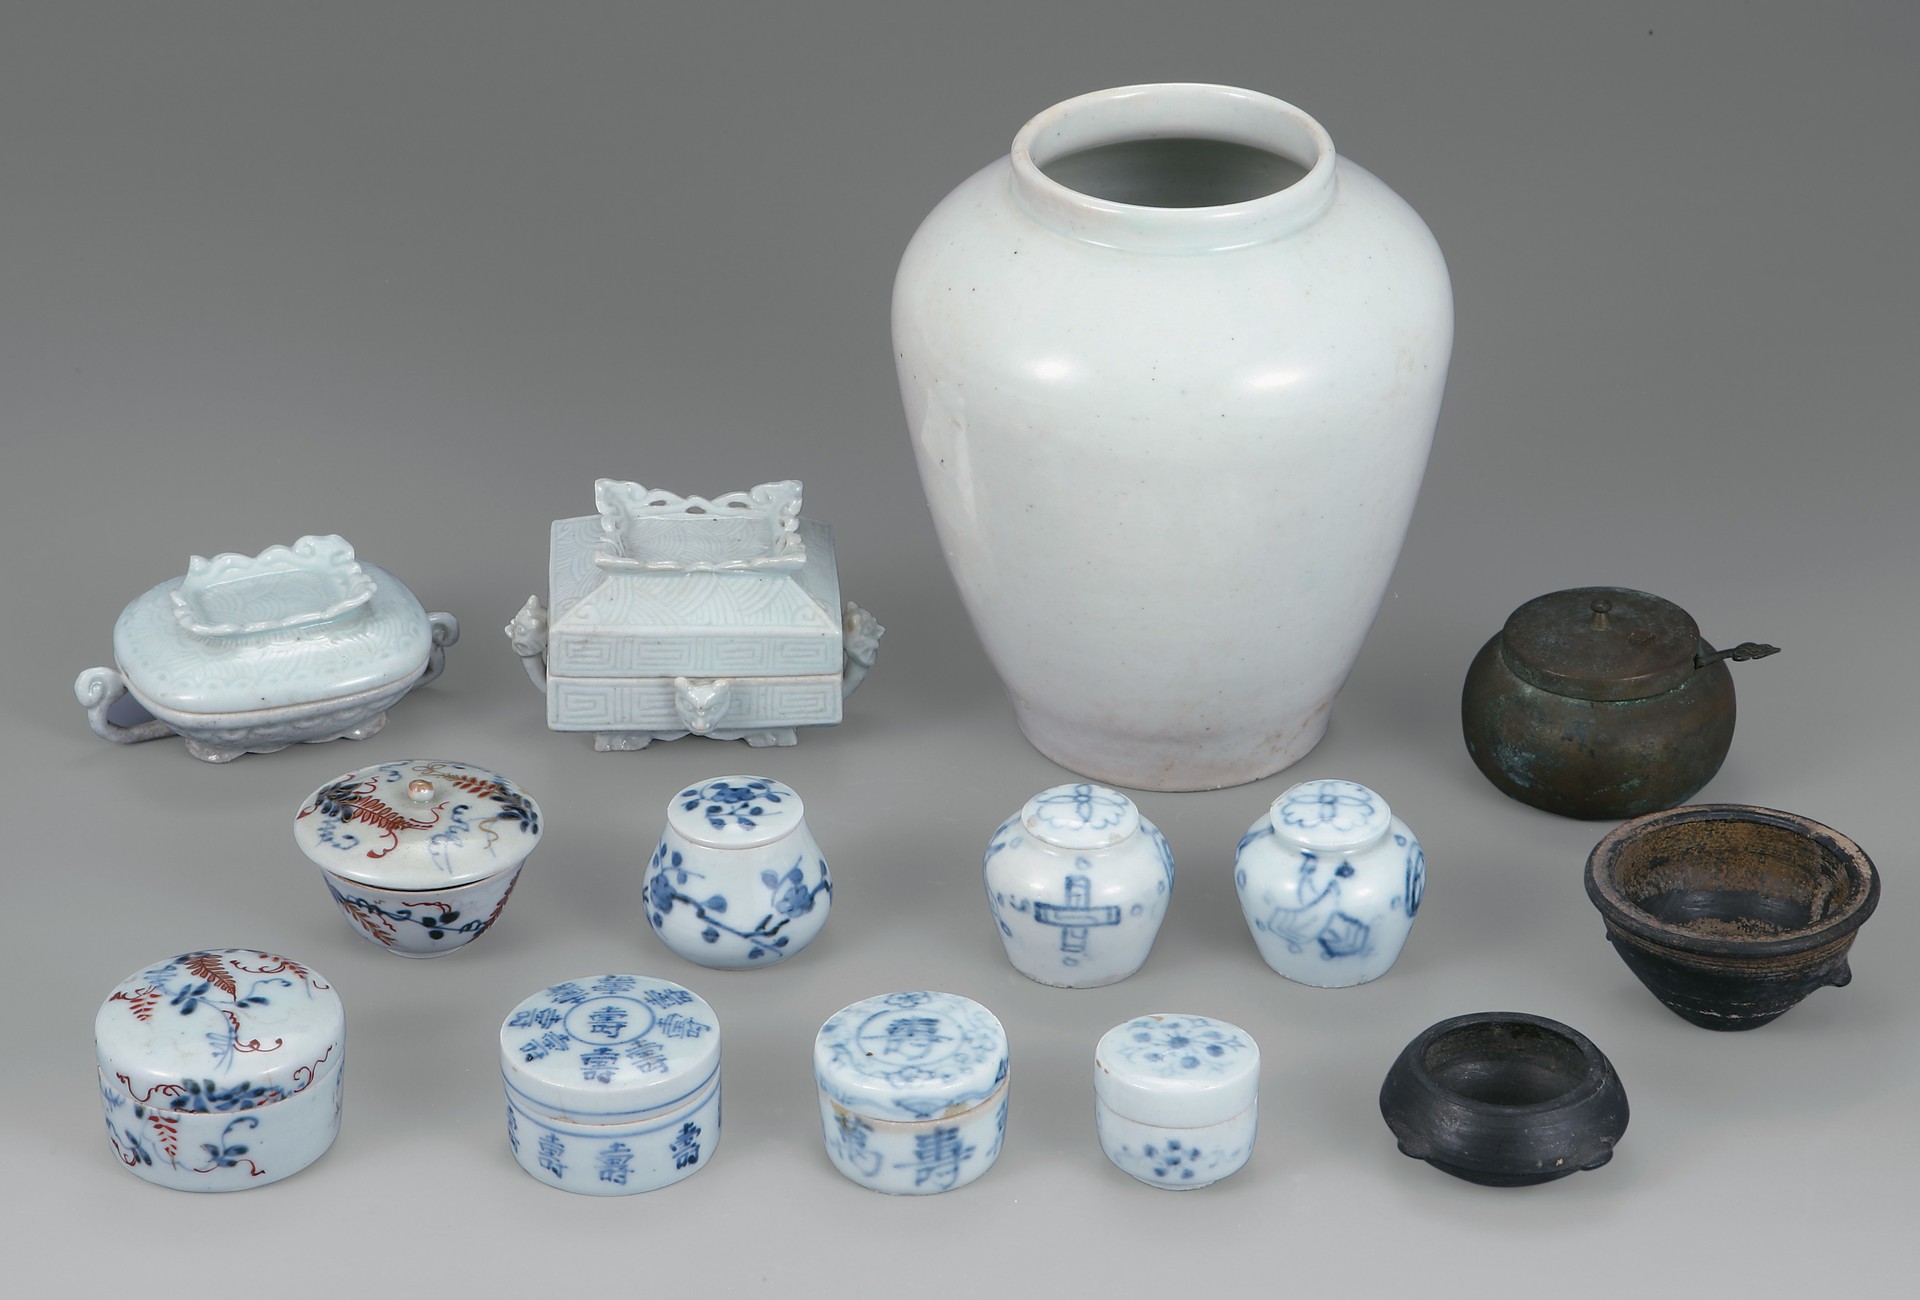 Collection of burial wares found in the tomb of Crown Prince Uiso, National Museum of Korea ⓒNational Museum of Korea